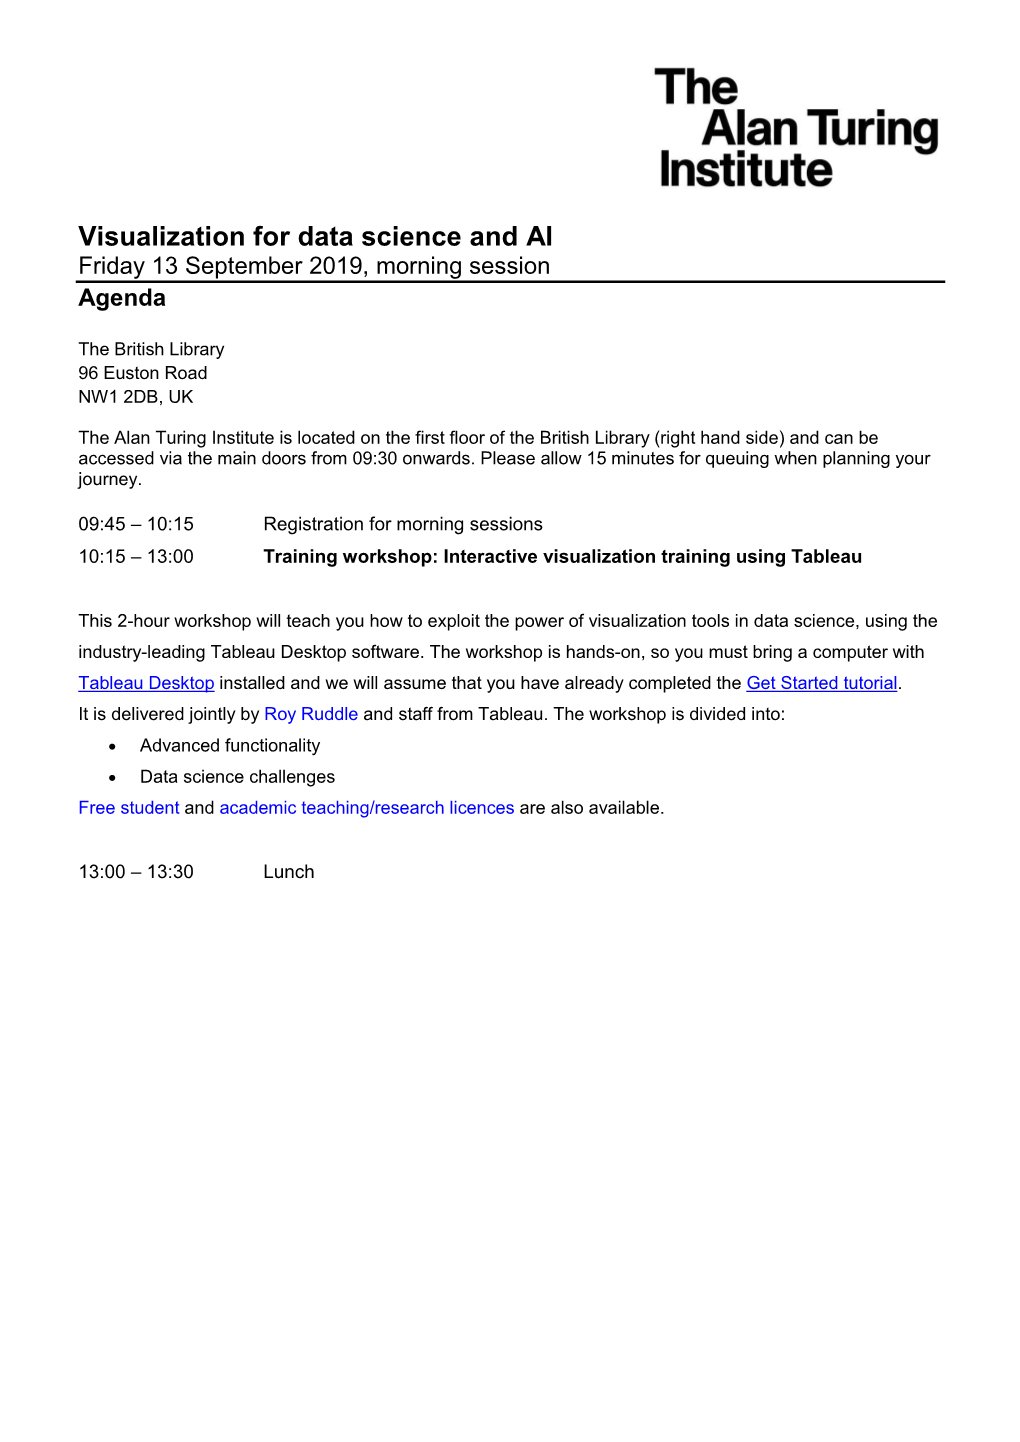 Visualization for Data Science and AI Friday 13 September 2019, Morning Session Agenda